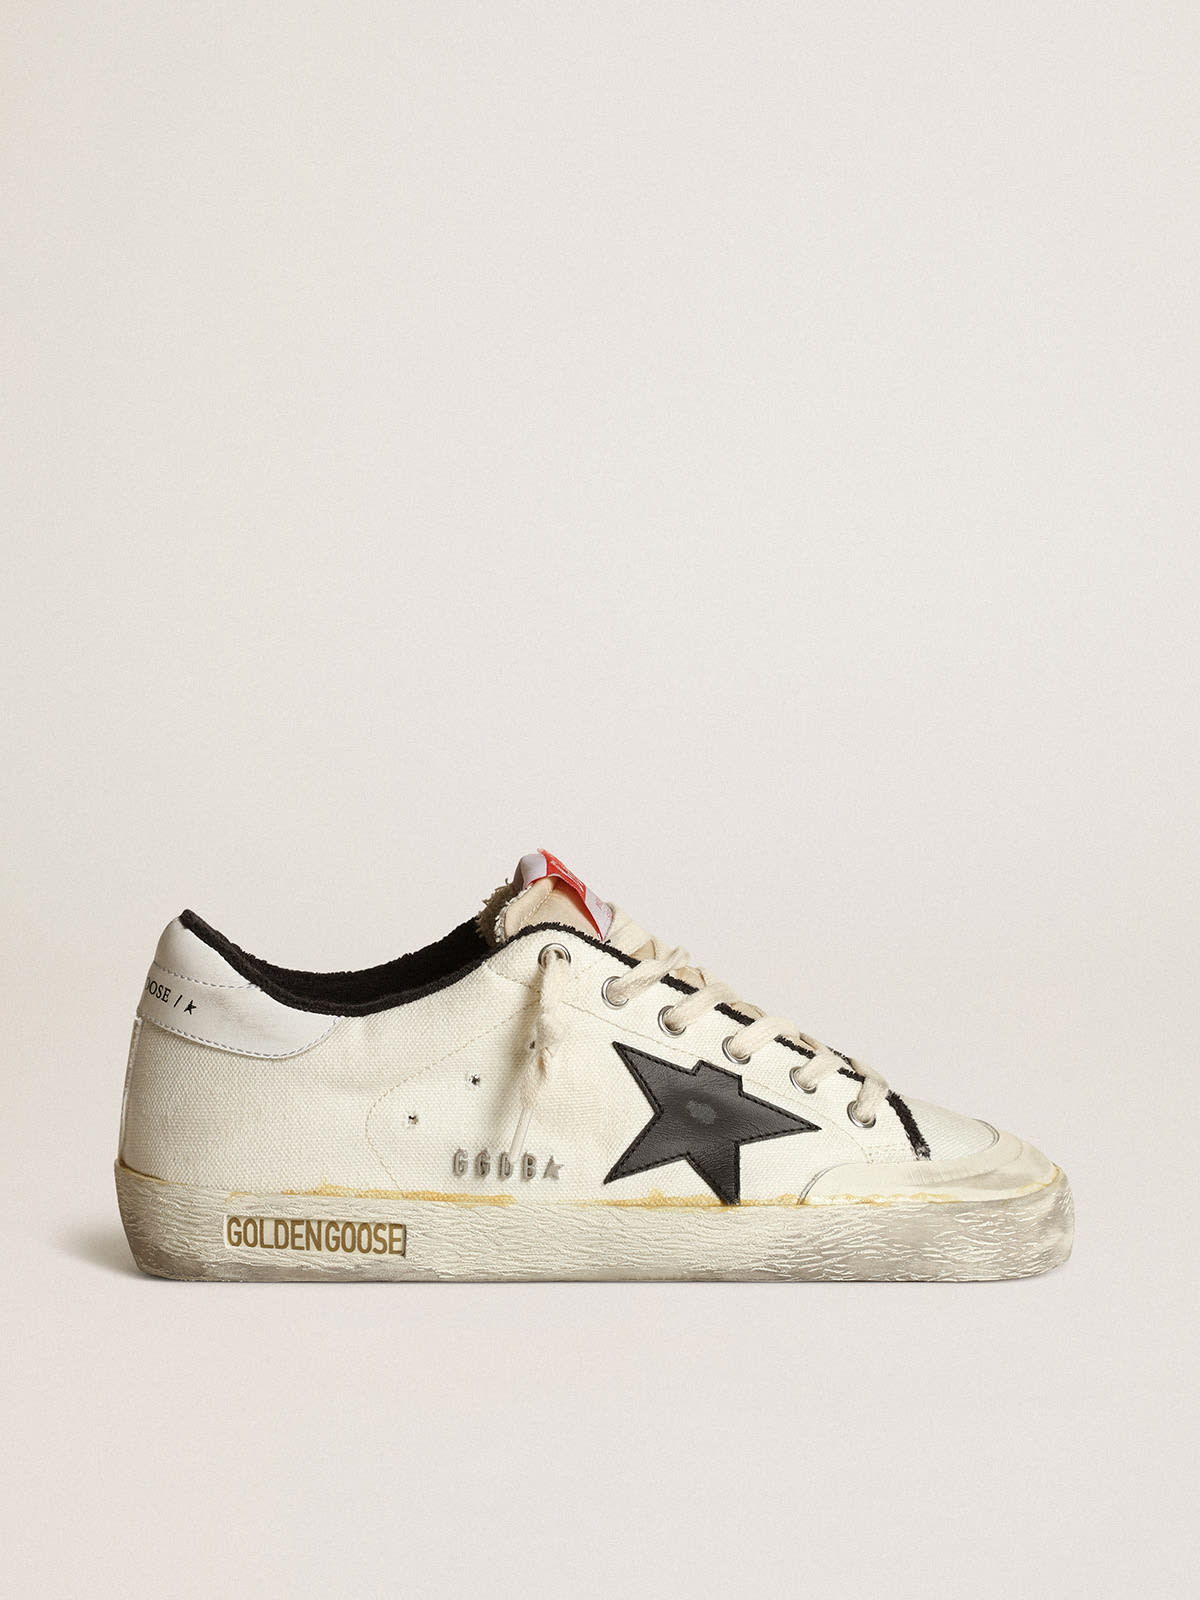 golden goose Super-Star star LTD leather beige in heel canvas tab Women’s with and black white sneakers